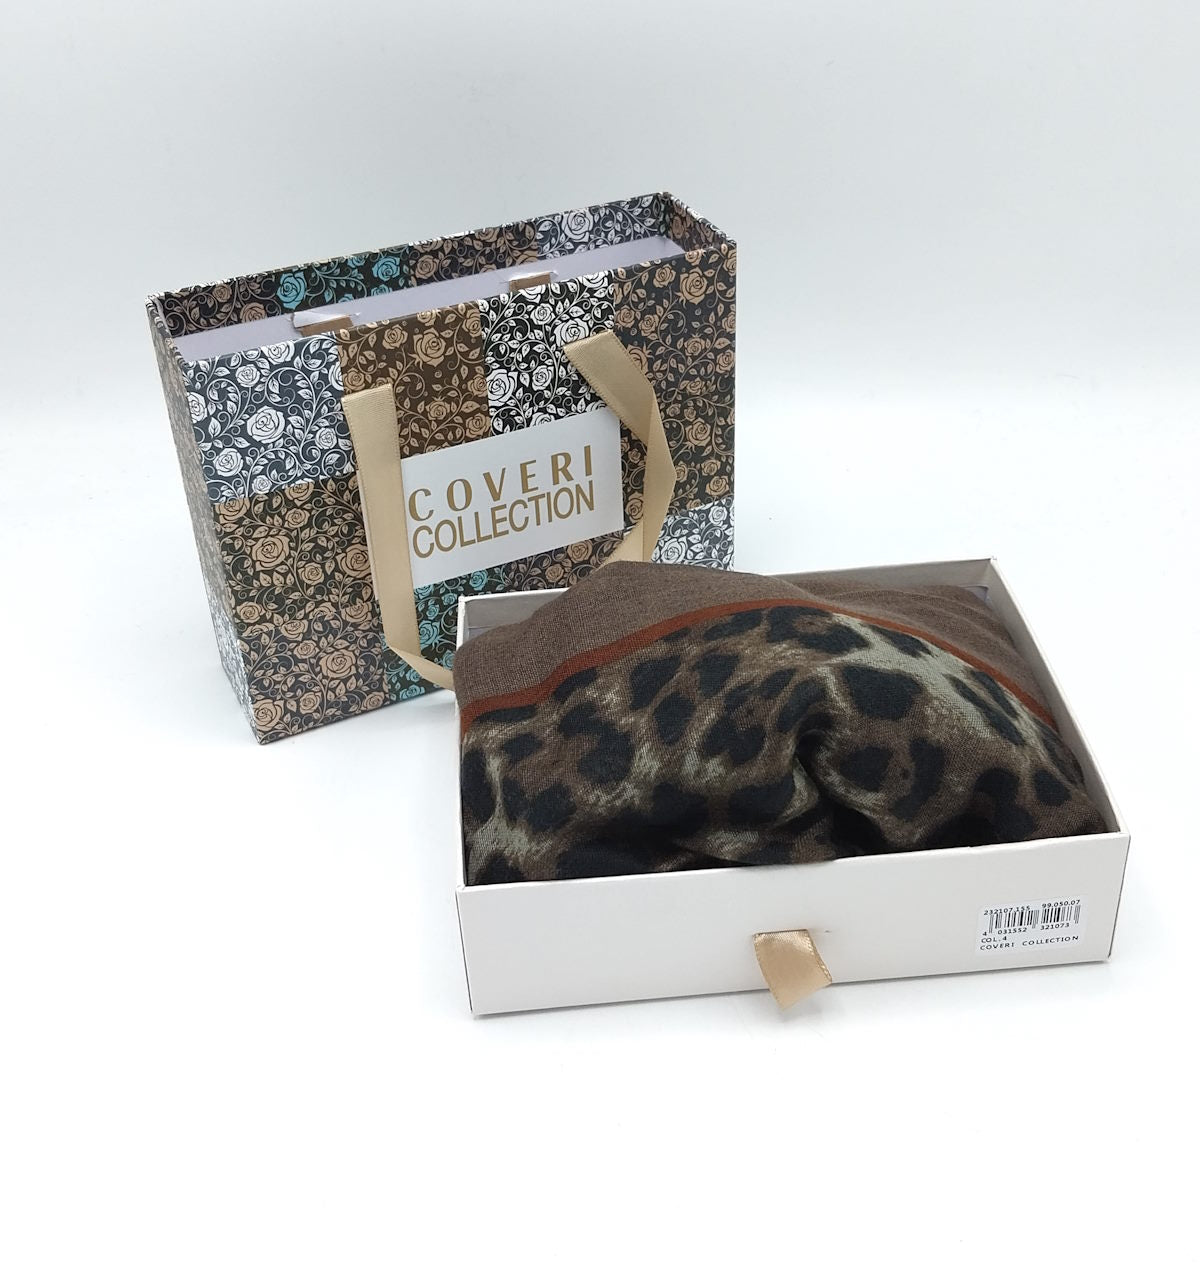 Scarf, Gift Box for women, Coveri Collection,  art. 232107